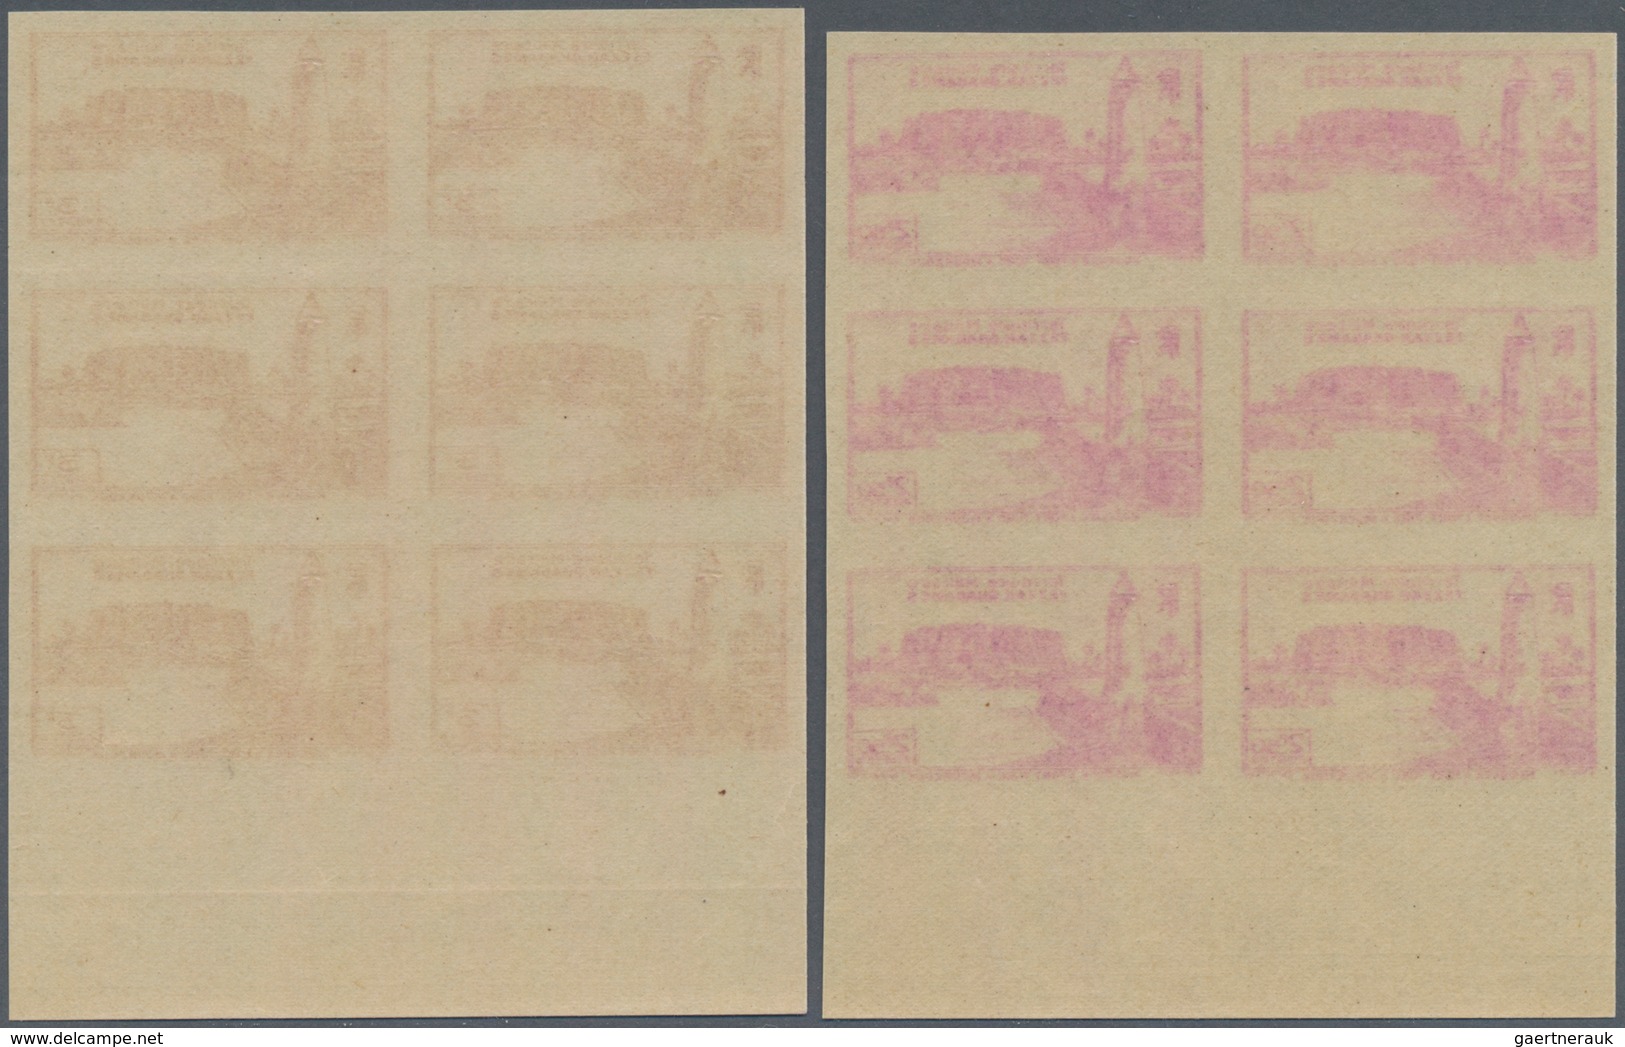 Fezzan: 1946, definitives complete set of 15 (Fort Sebha, Mosque Mursuk, map of Fezzan and camel rid